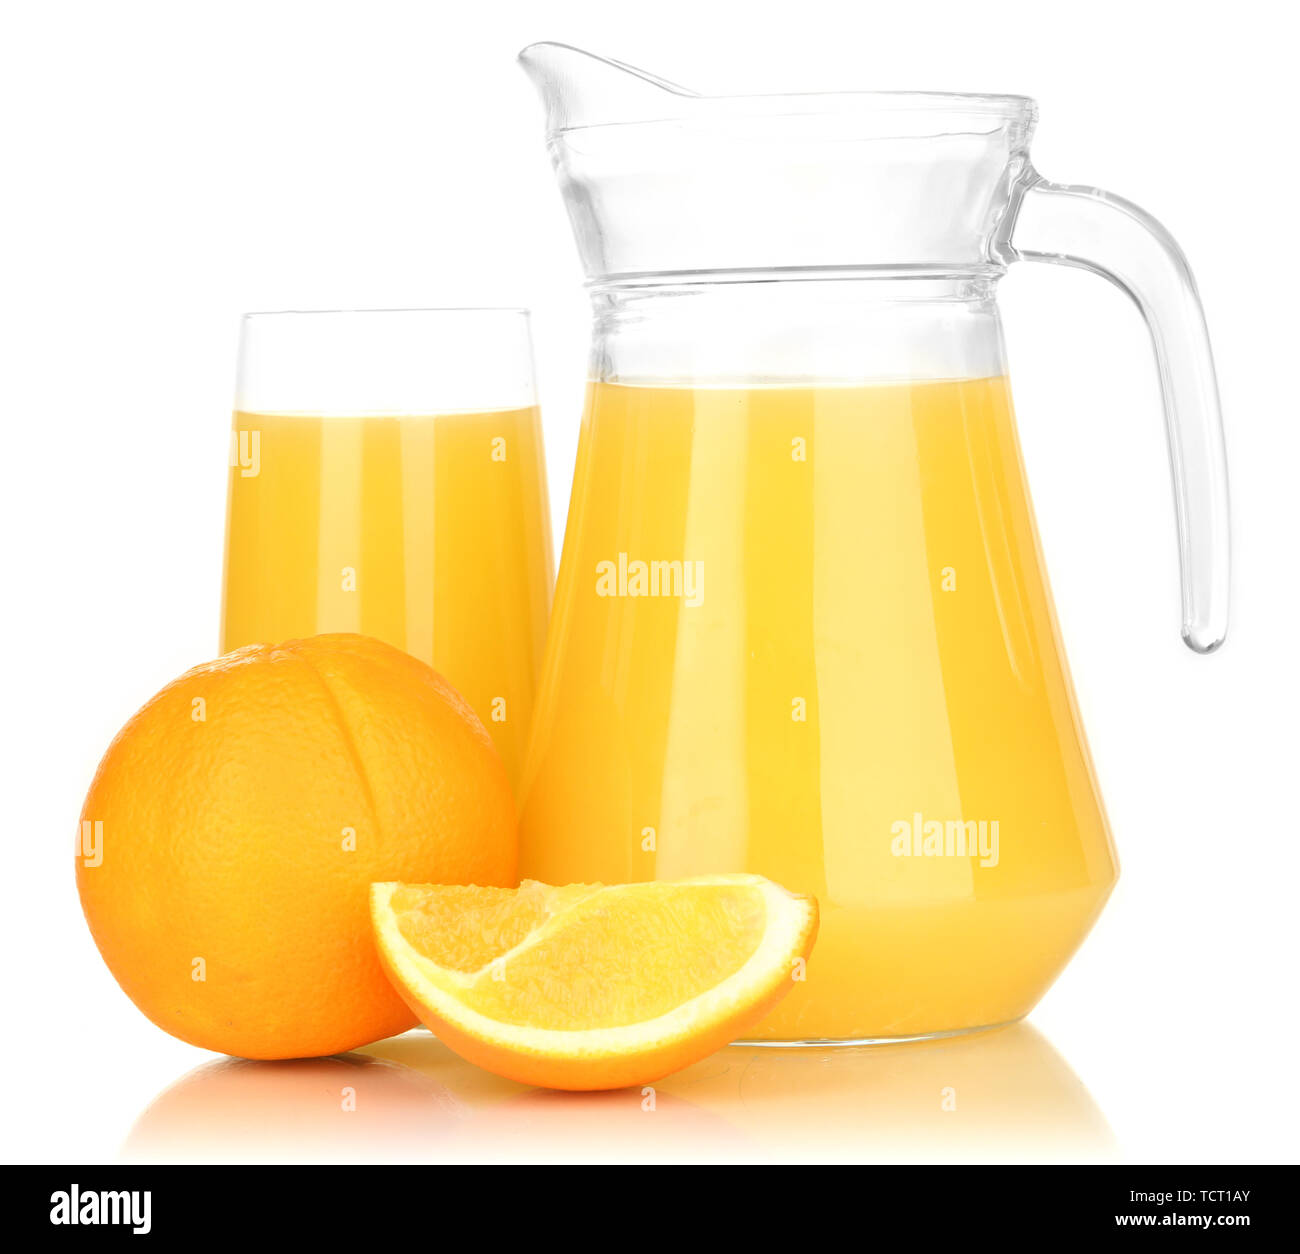 https://c8.alamy.com/comp/TCT1AY/full-glass-and-jug-of-orange-juice-and-oranges-isolated-on-white-TCT1AY.jpg